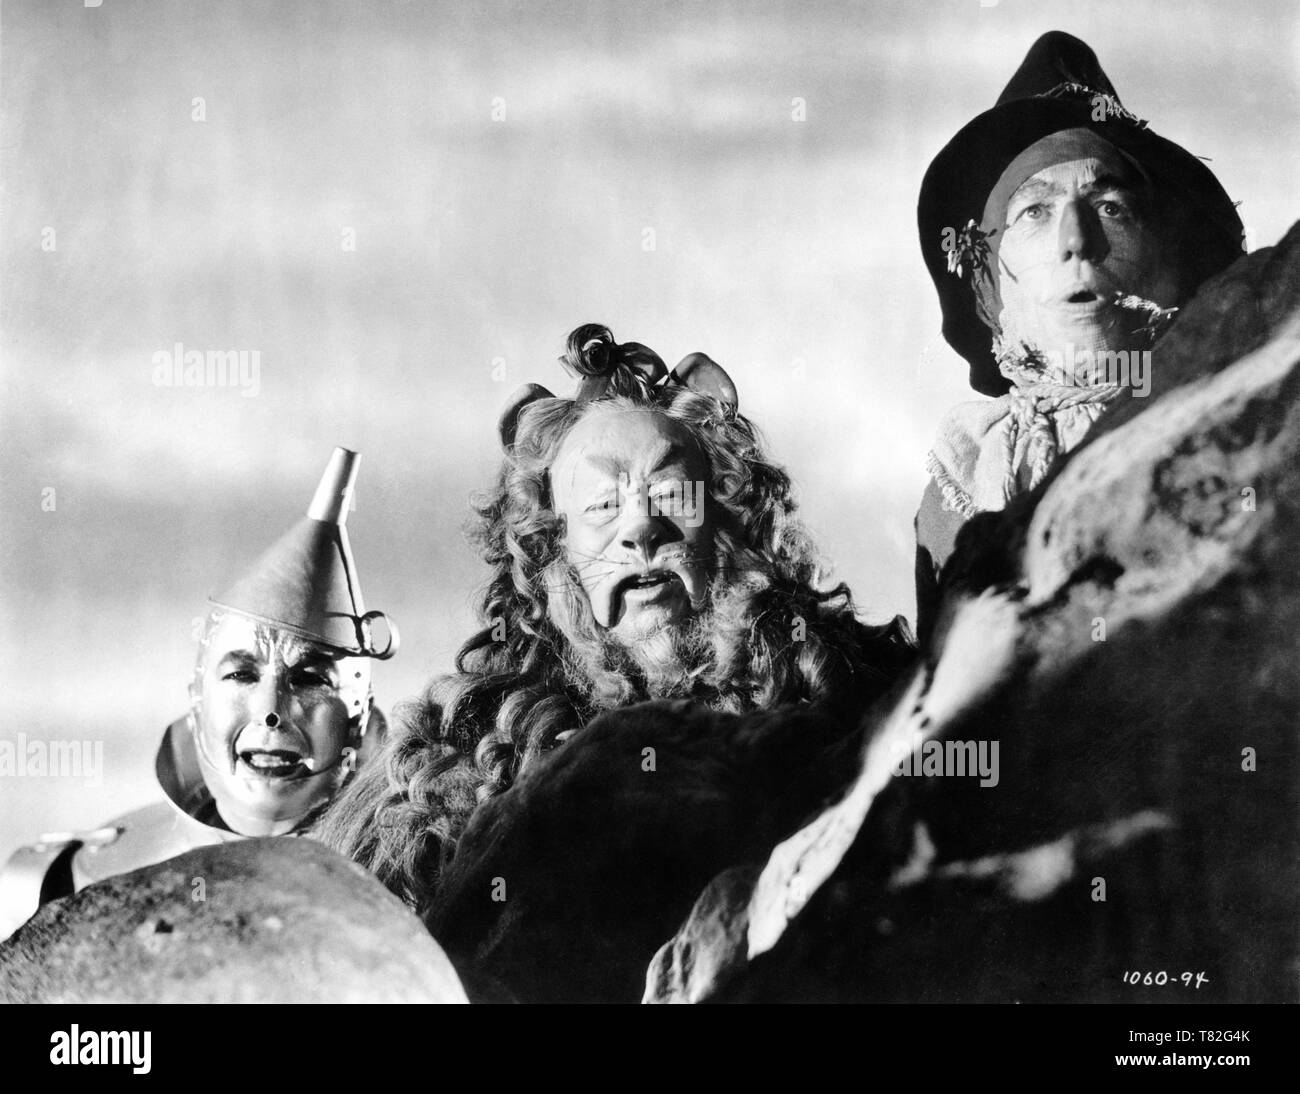 JACK HALEY as Tin Man BERT LAHR as Cowardly Lion RAY BOLGER as Scarecrow THE WIZARD OF OZ 1939 director Victor Fleming book Frank L. Baum Metro Goldwyn Mayer Stock Photo